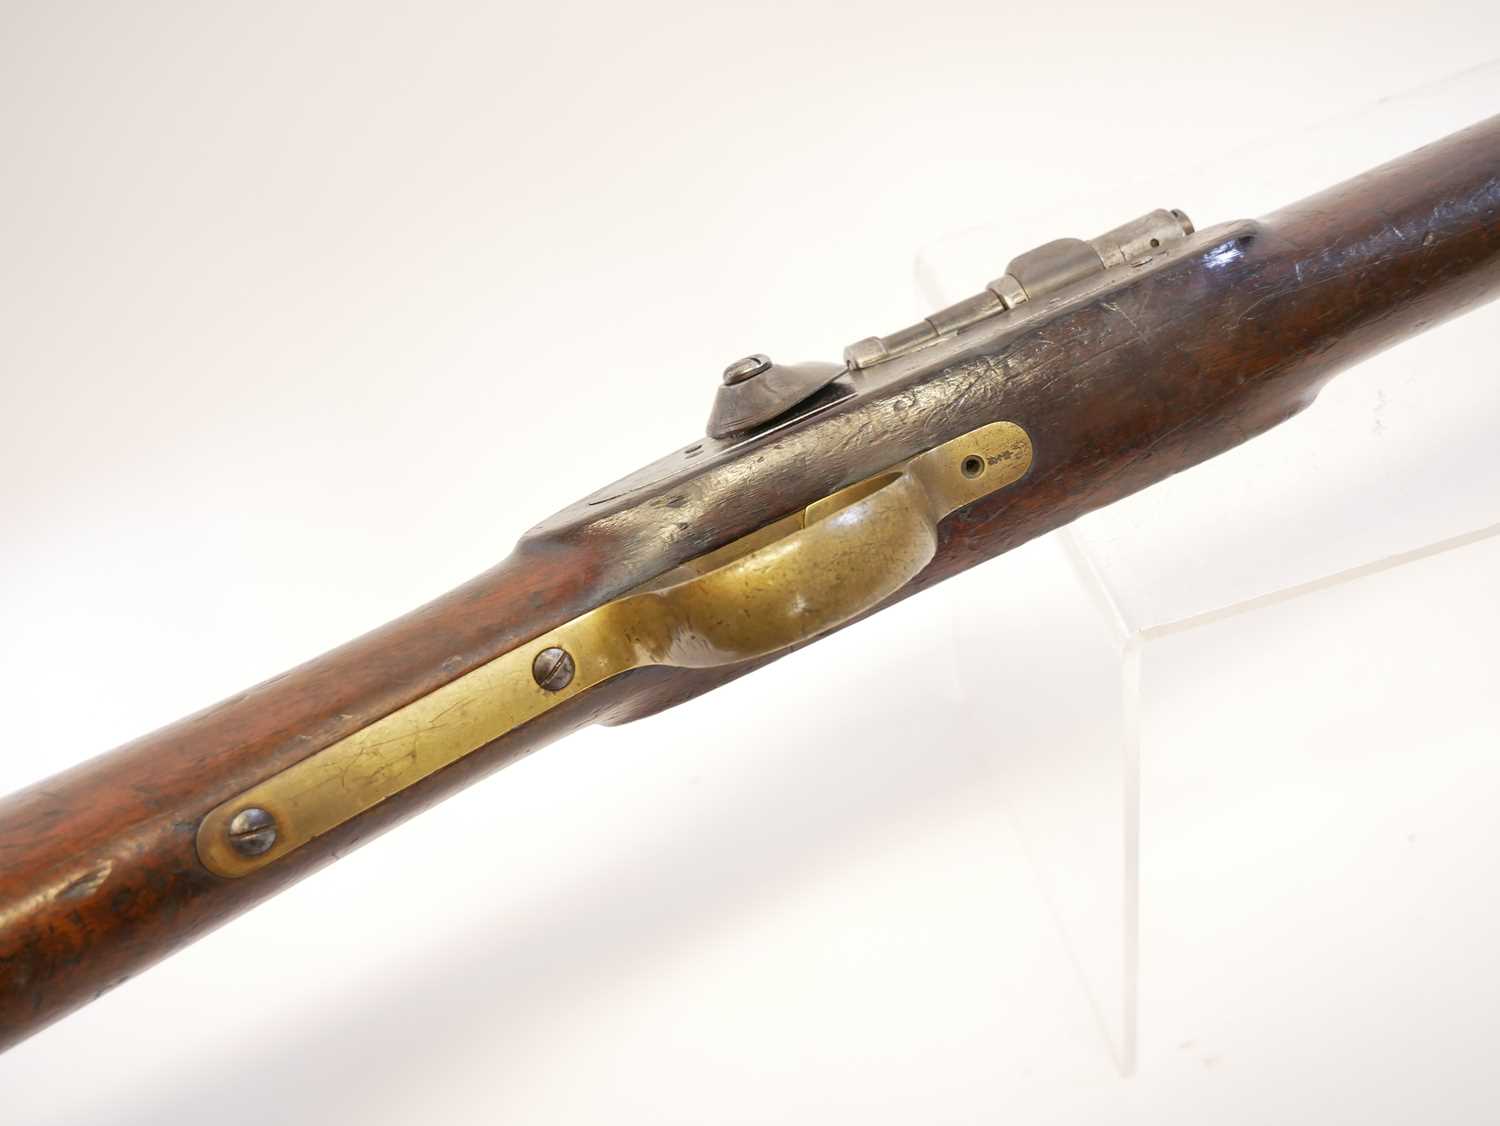 London Small Arms .577 Snider carbine, 21inch barrel with bayonet lug and folding ladder sight, - Image 9 of 16